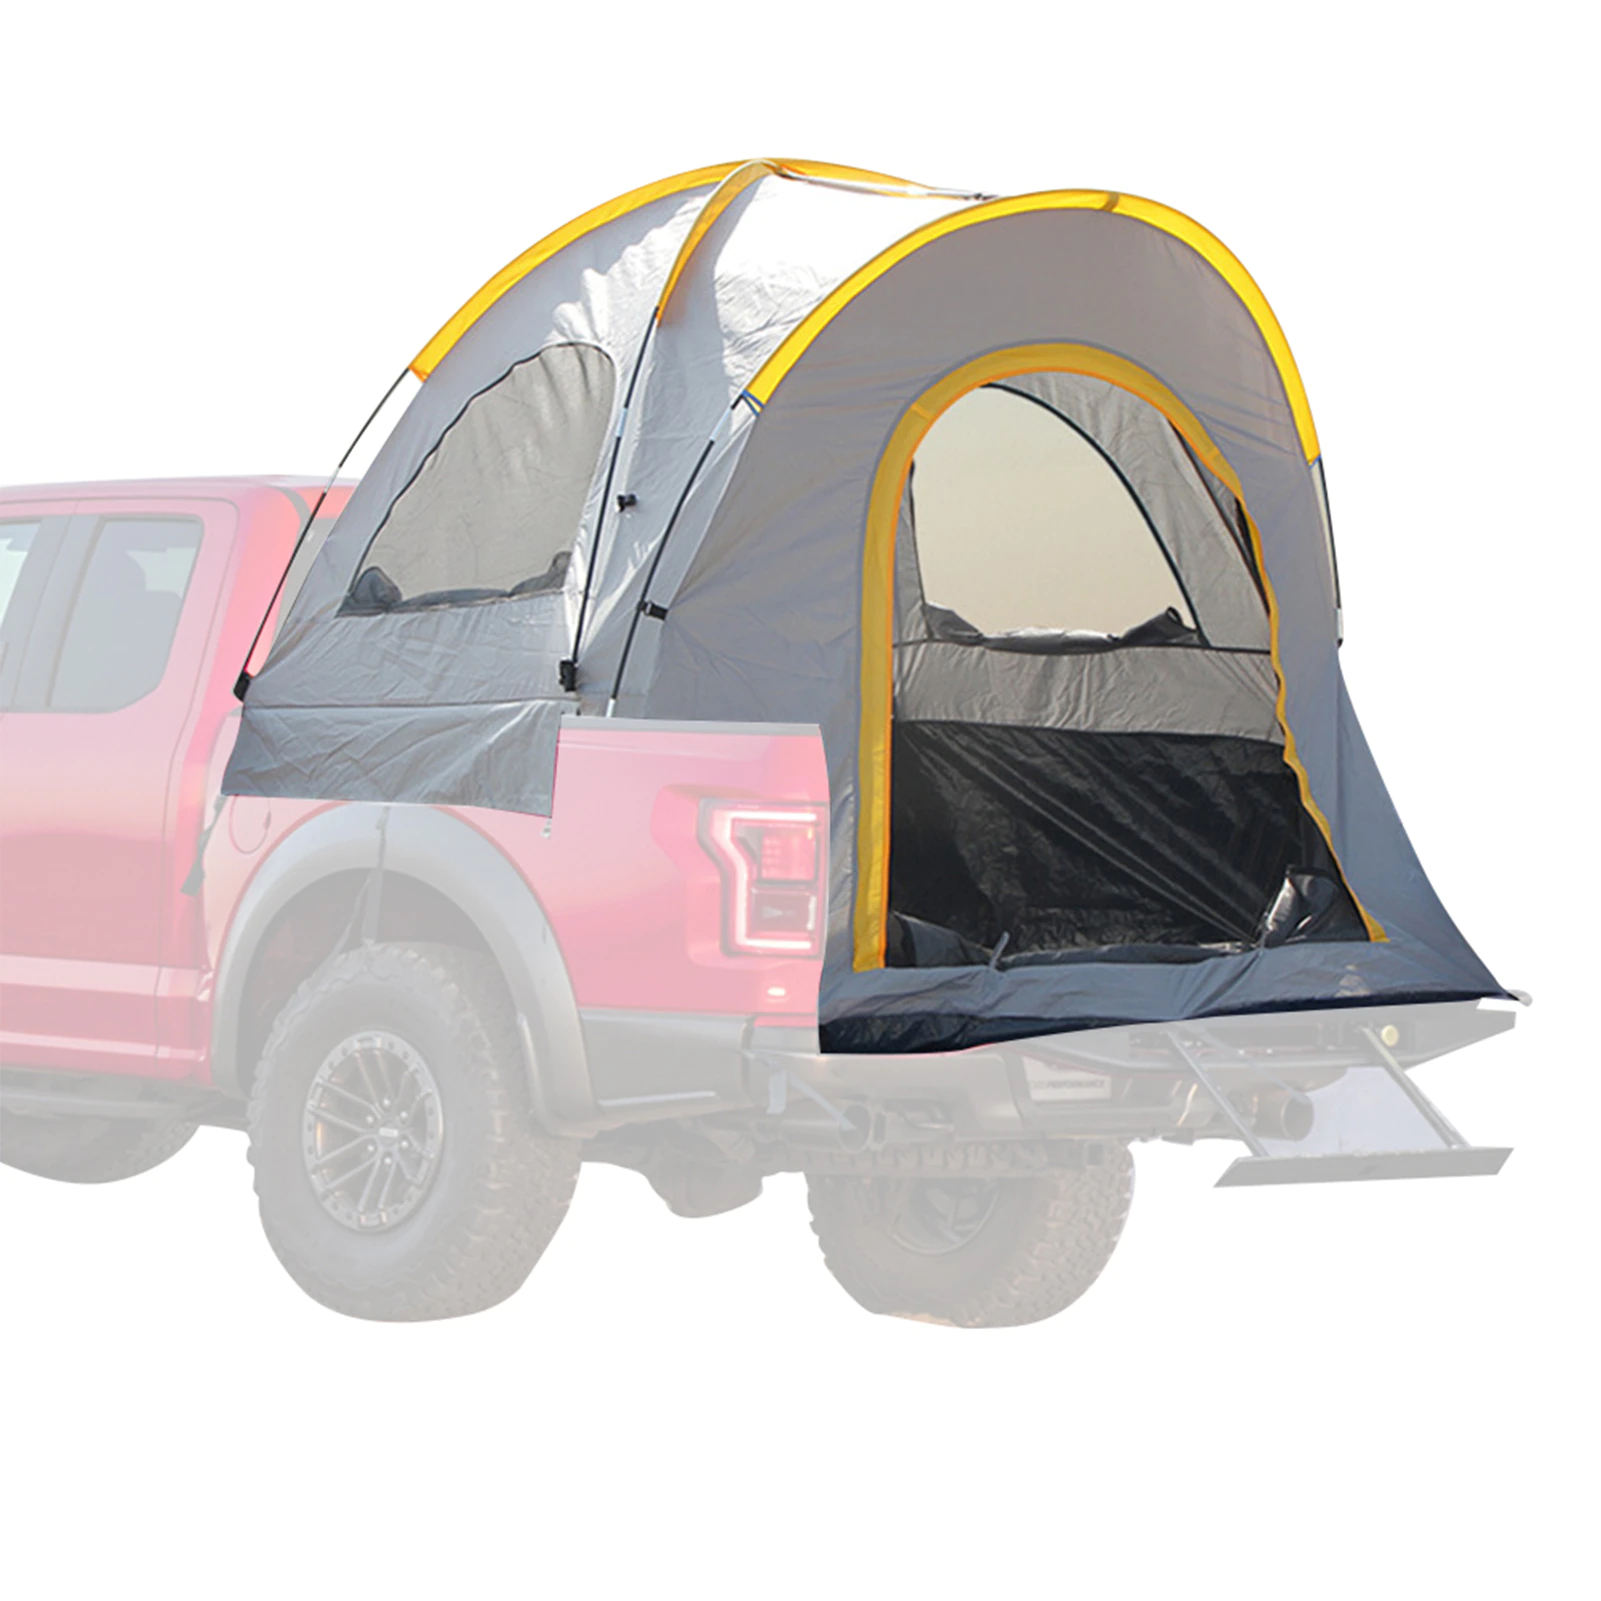 Cheap Goat Tents Truck Camping Tent Pickup Tent For Truck Outdoor Camping Anti UV Vehicle Bed Tent PU2000MM For Camping Traveling Hiking